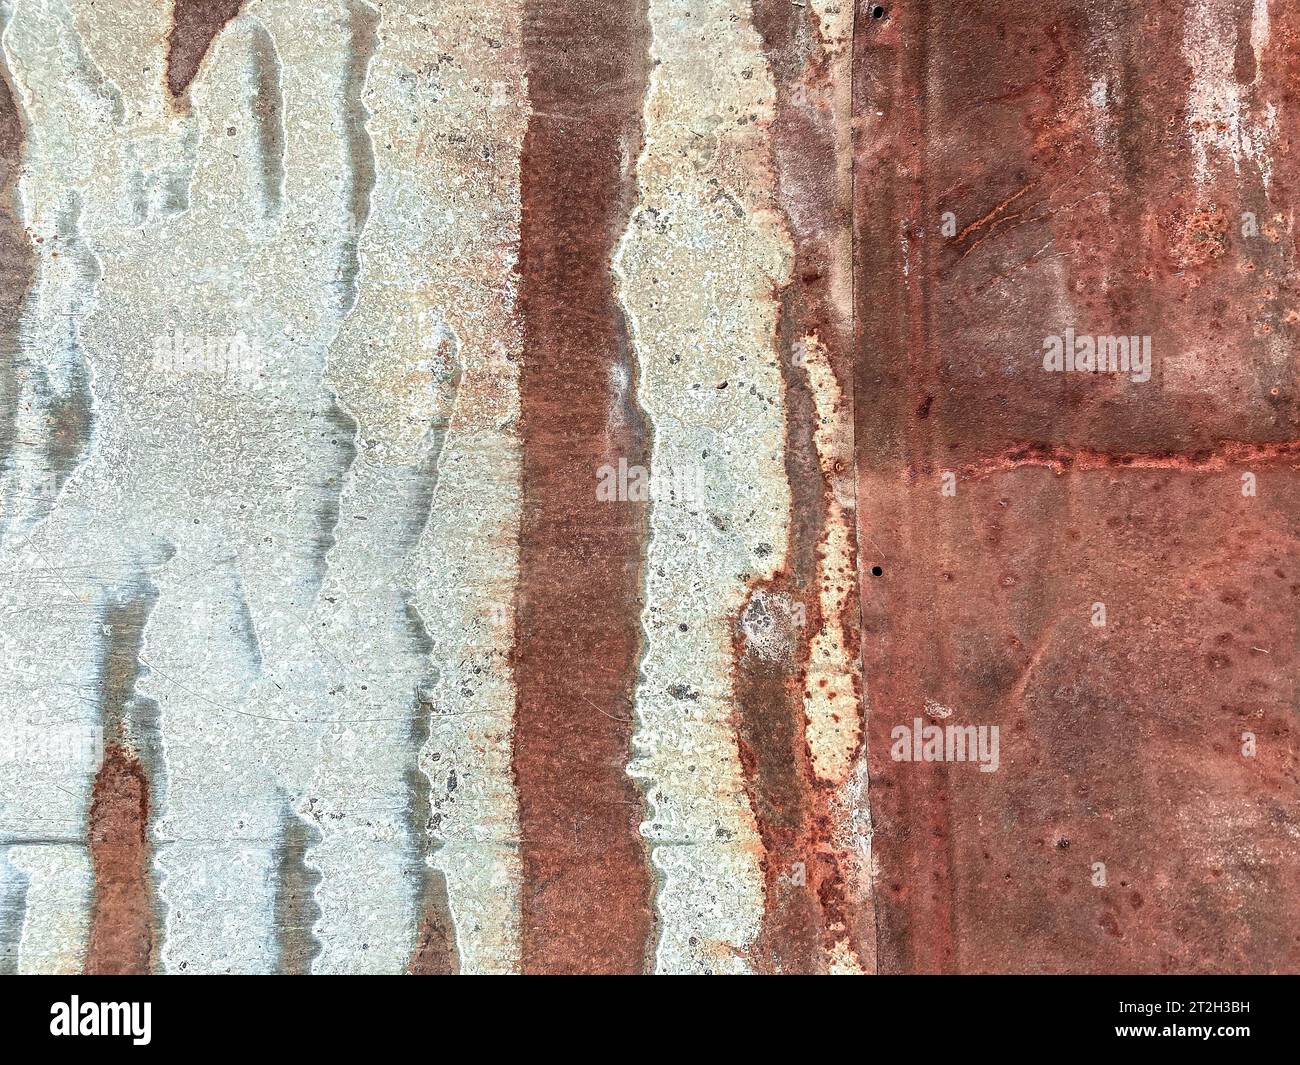 rusty, old, patchy texture. rust covered the metal door. signs of corrosion on the background. Stock Photo